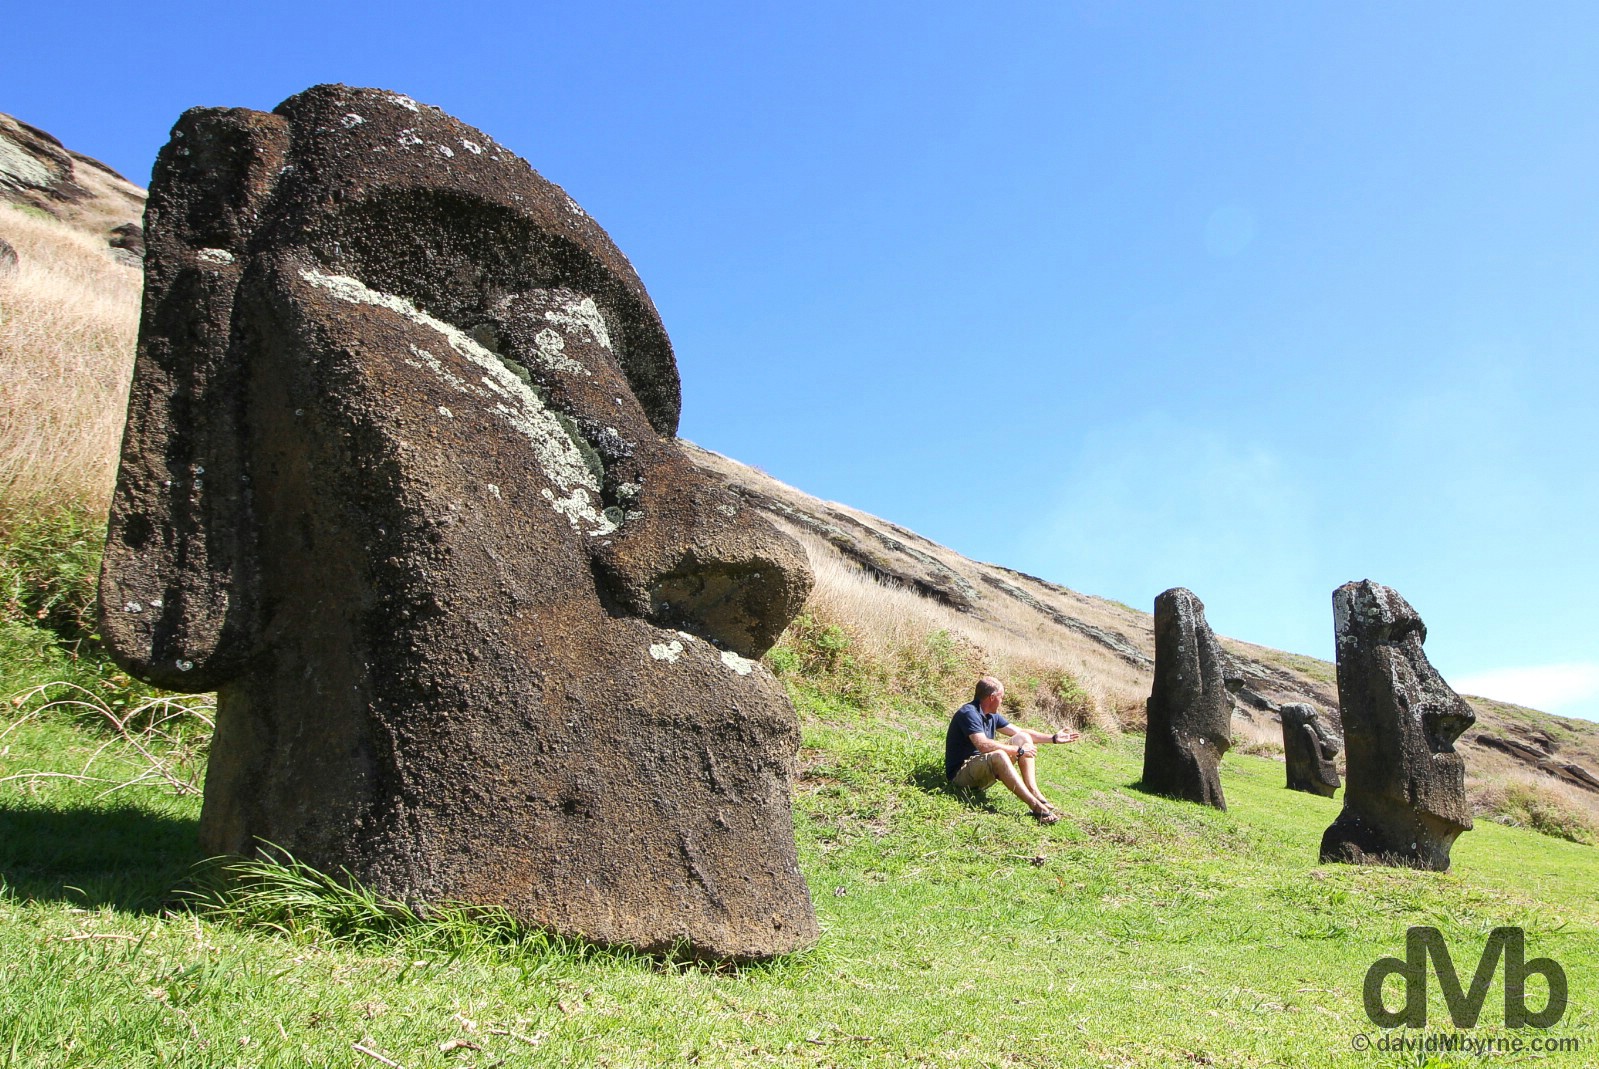 Hanging out in Rano Raraku crater on Easter Island, Chile. October 1, 2015.